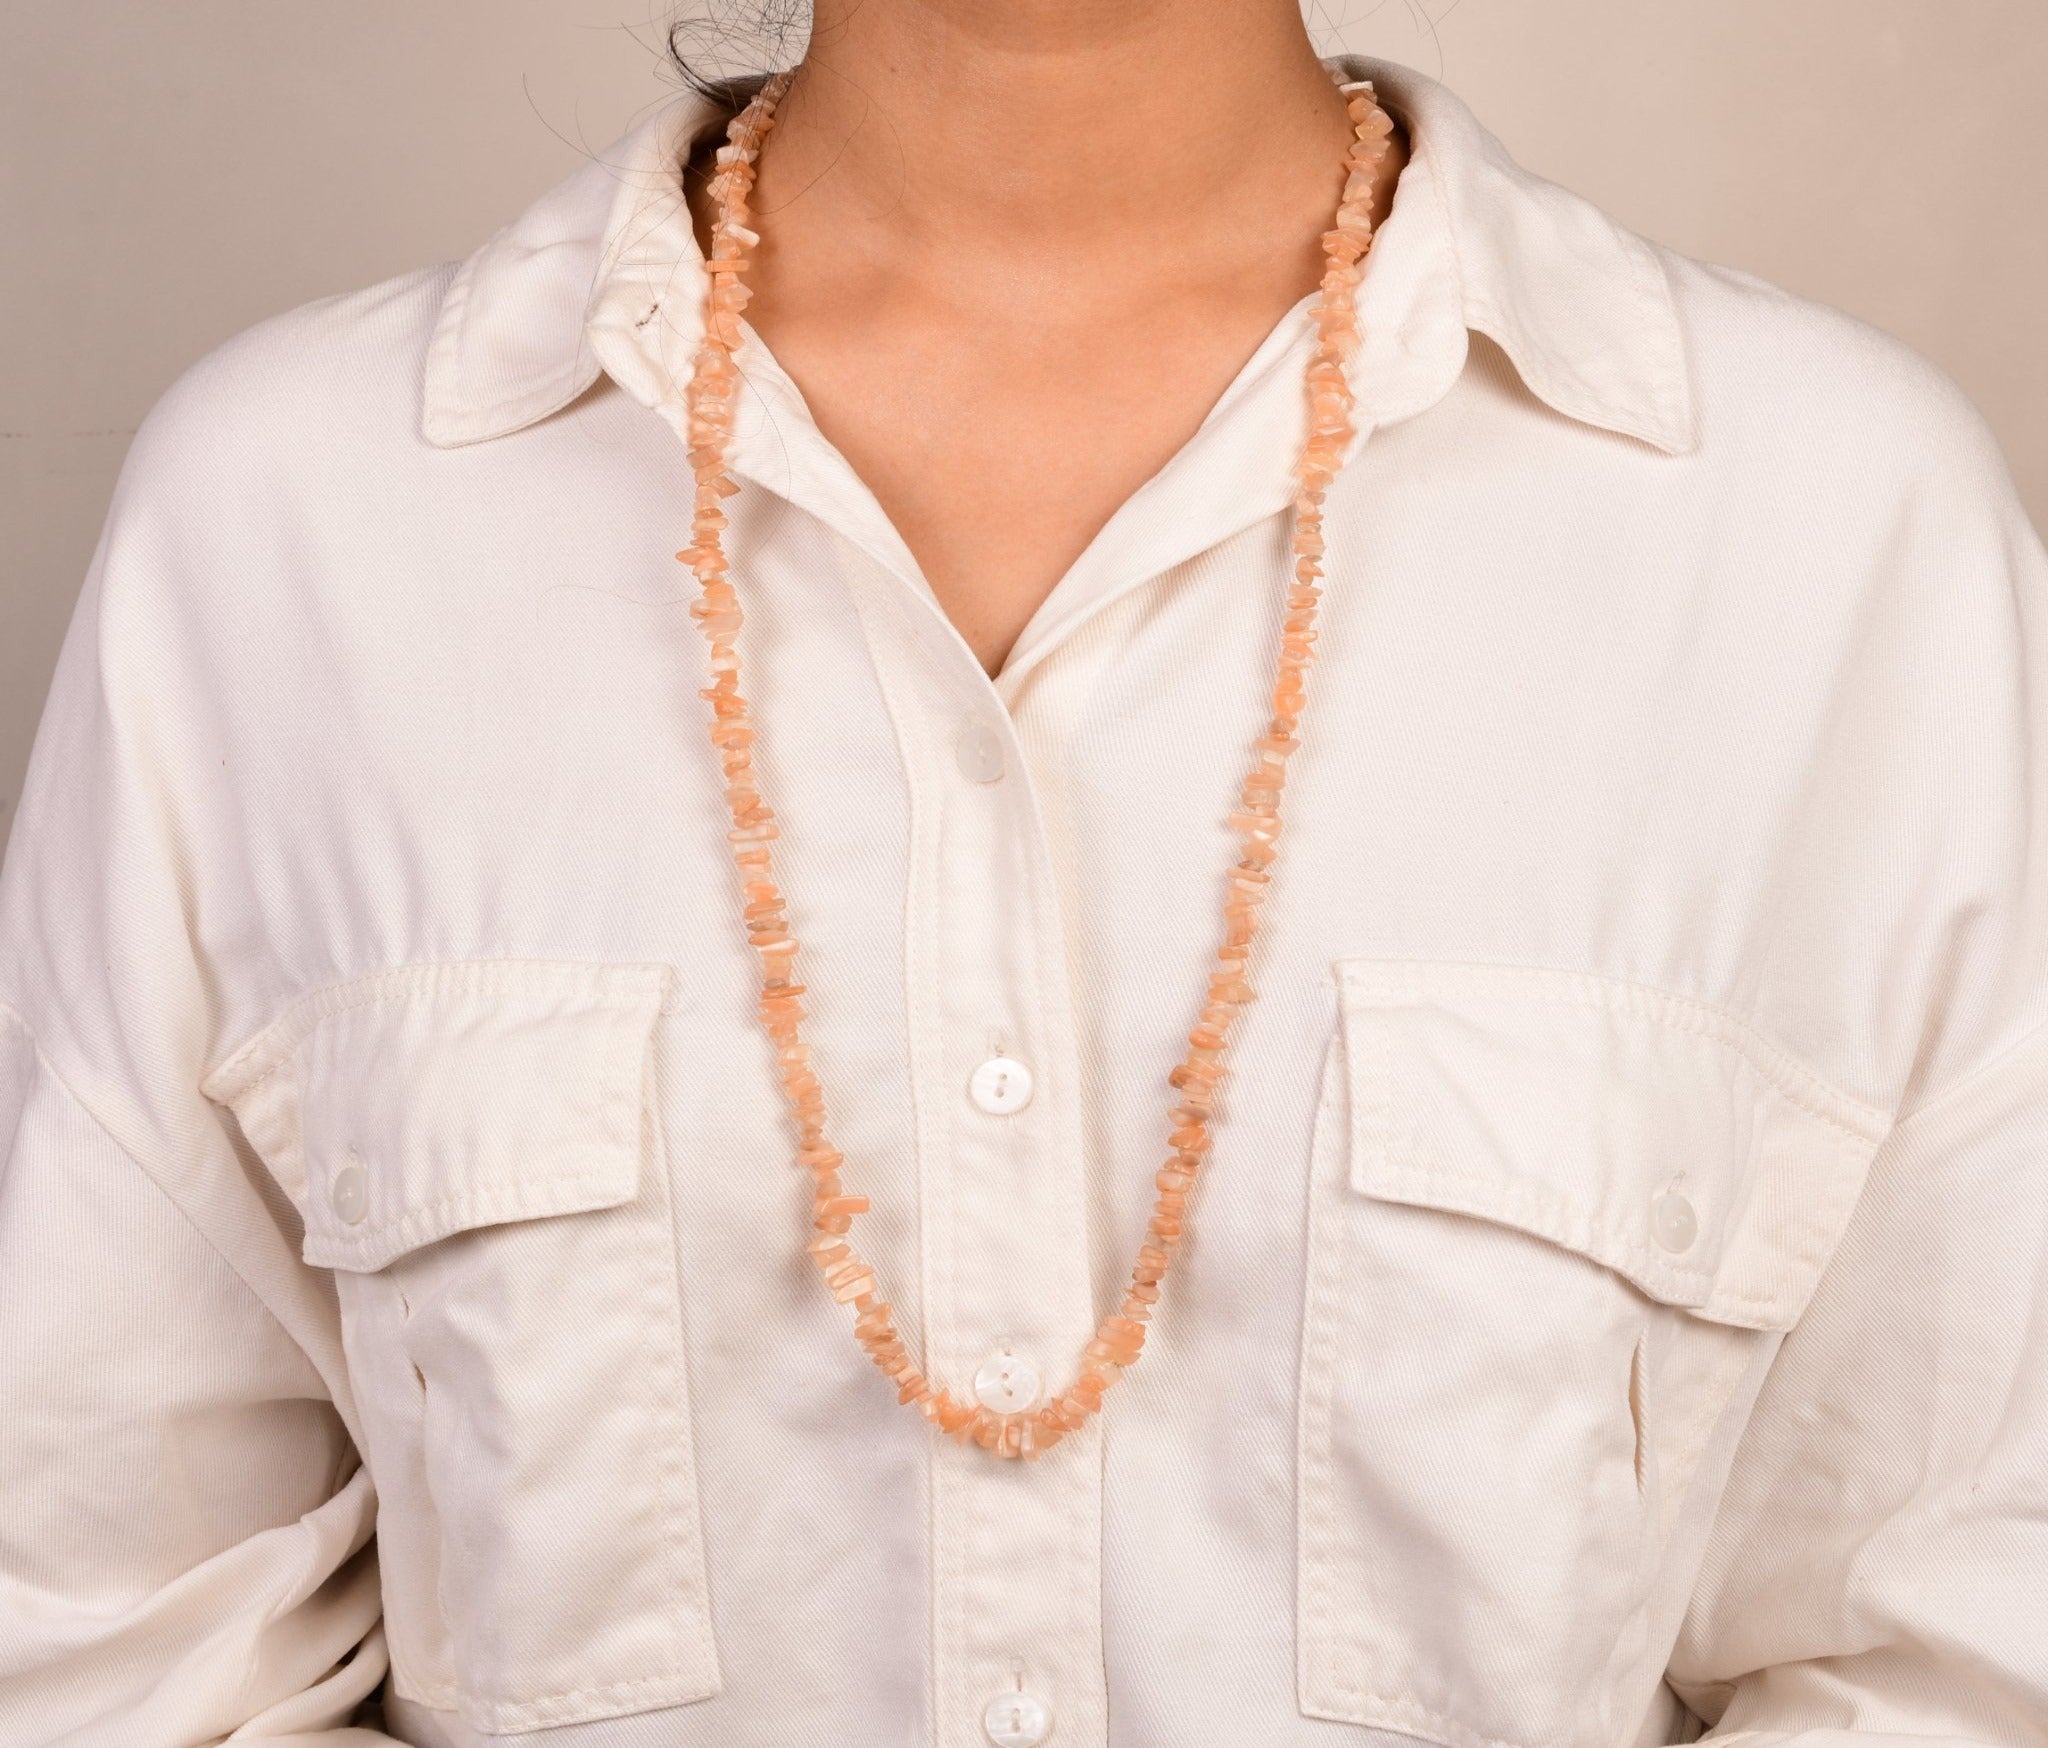 Moonstone Chips Necklace